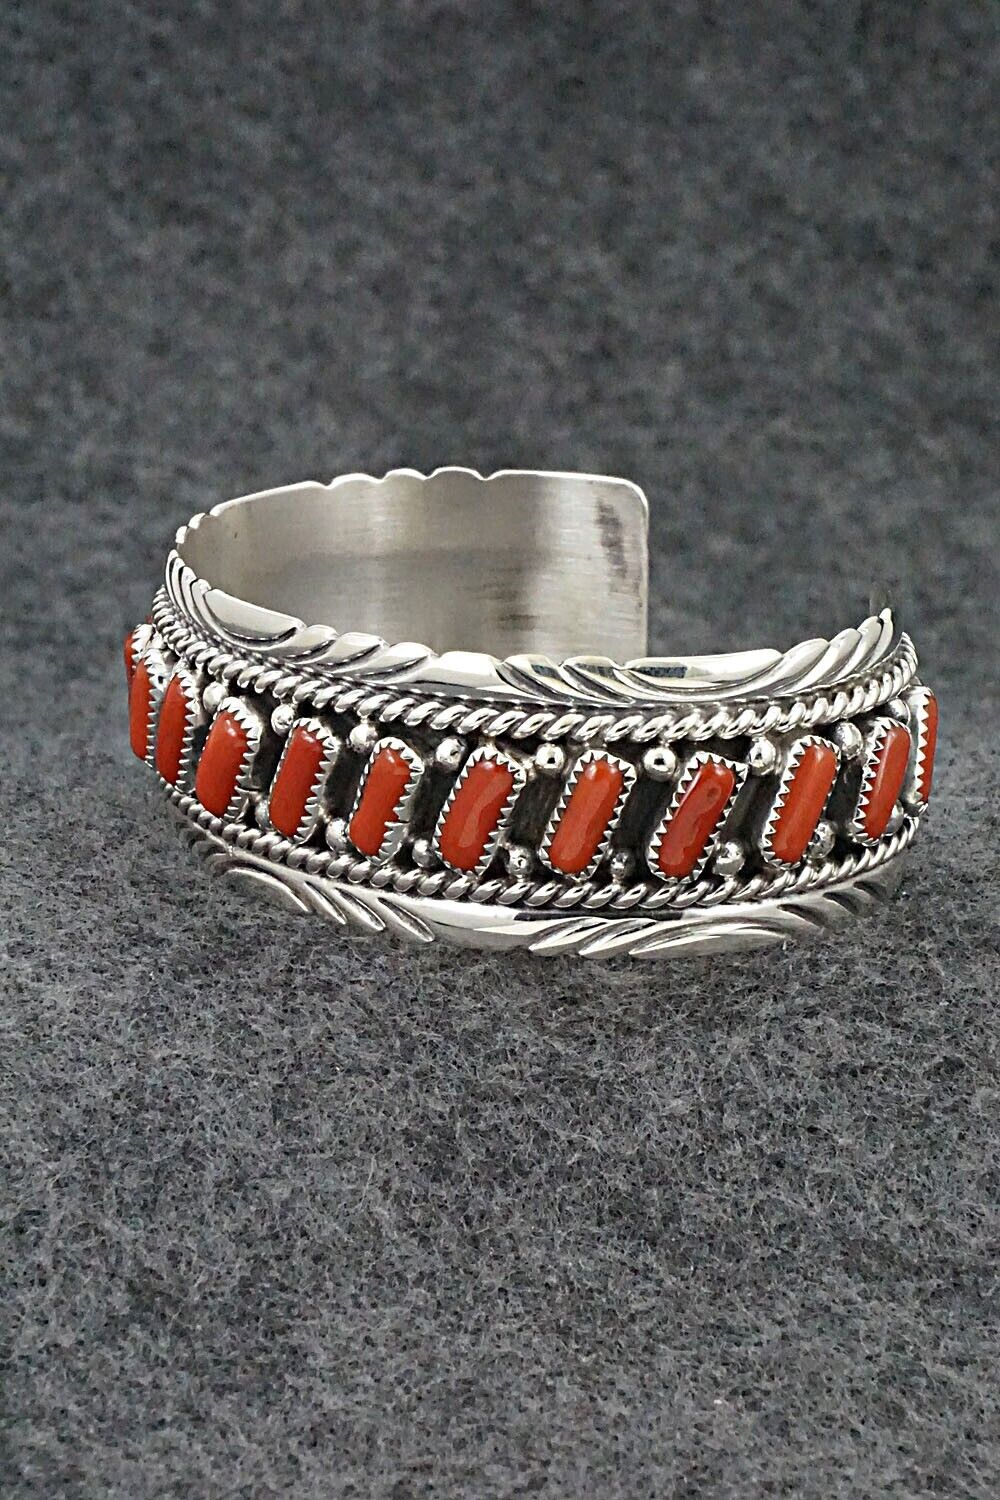 Coral & Sterling Silver Bracelet - Chester Charley